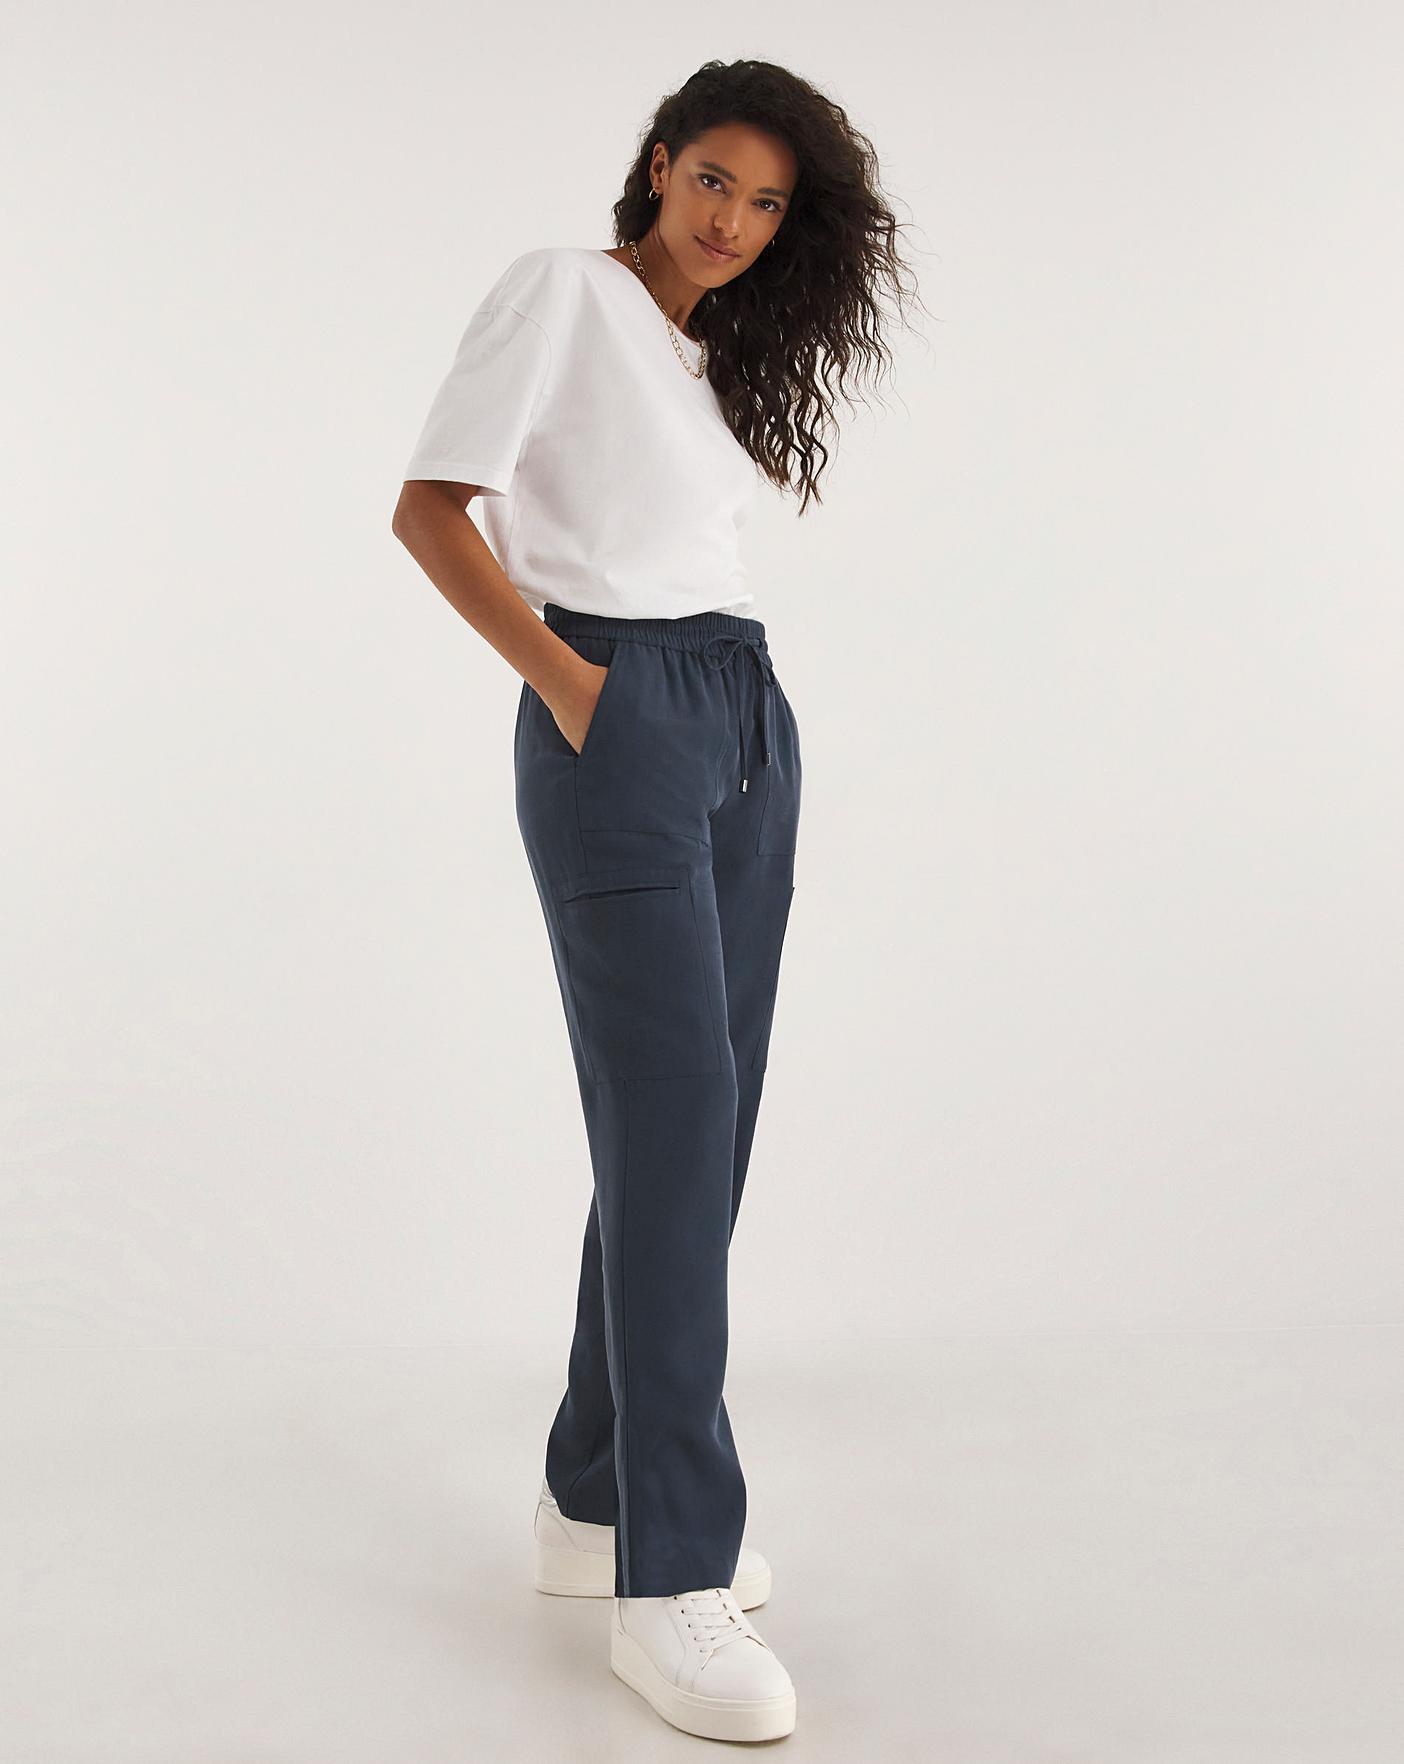 Buy Online Women Navy Blue Solid Trousers at best price  Plussin